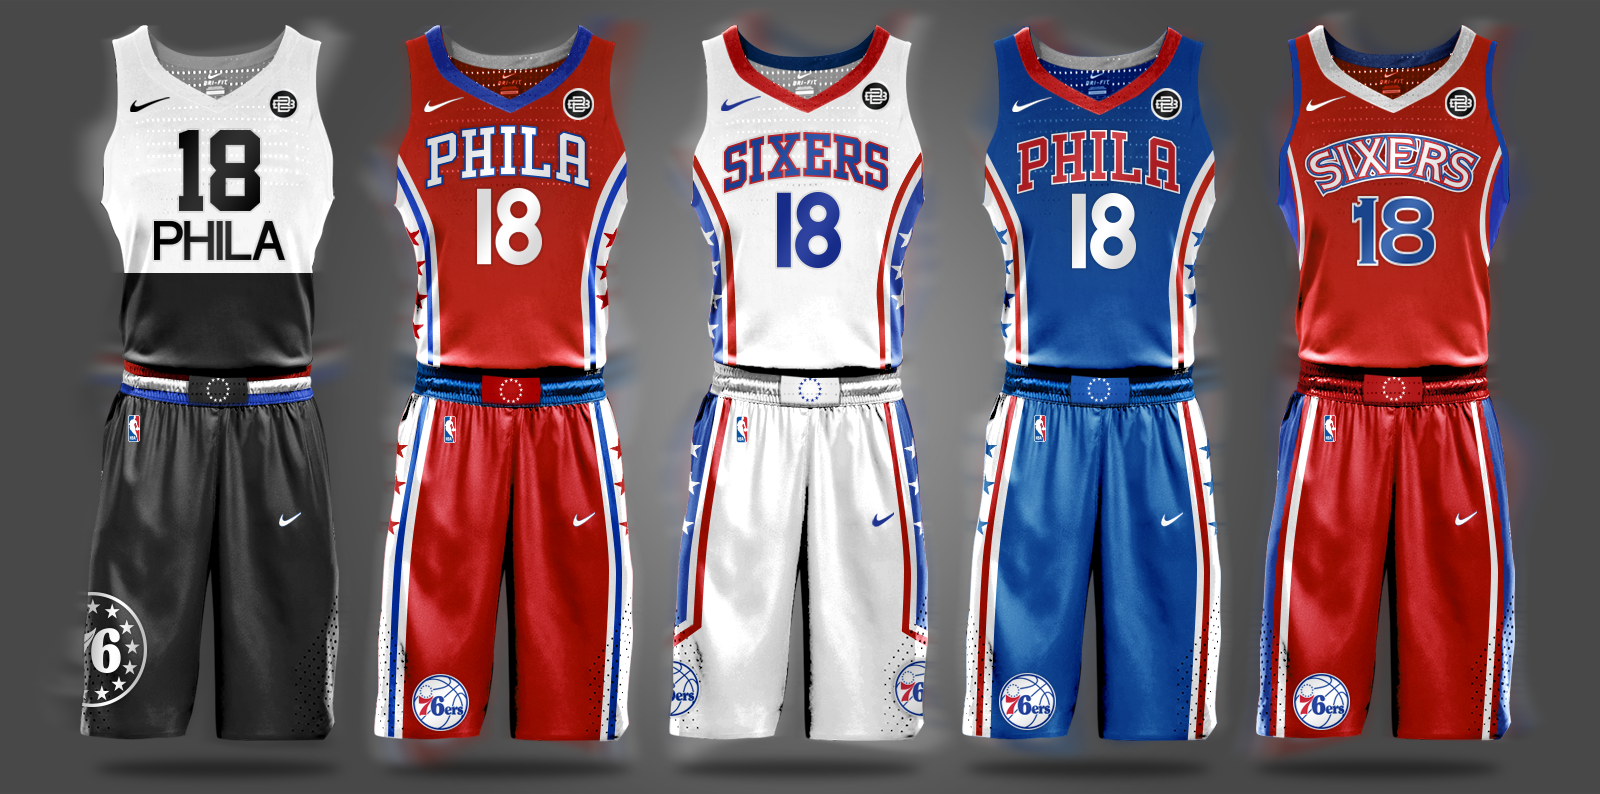 76ers new jersey 2018